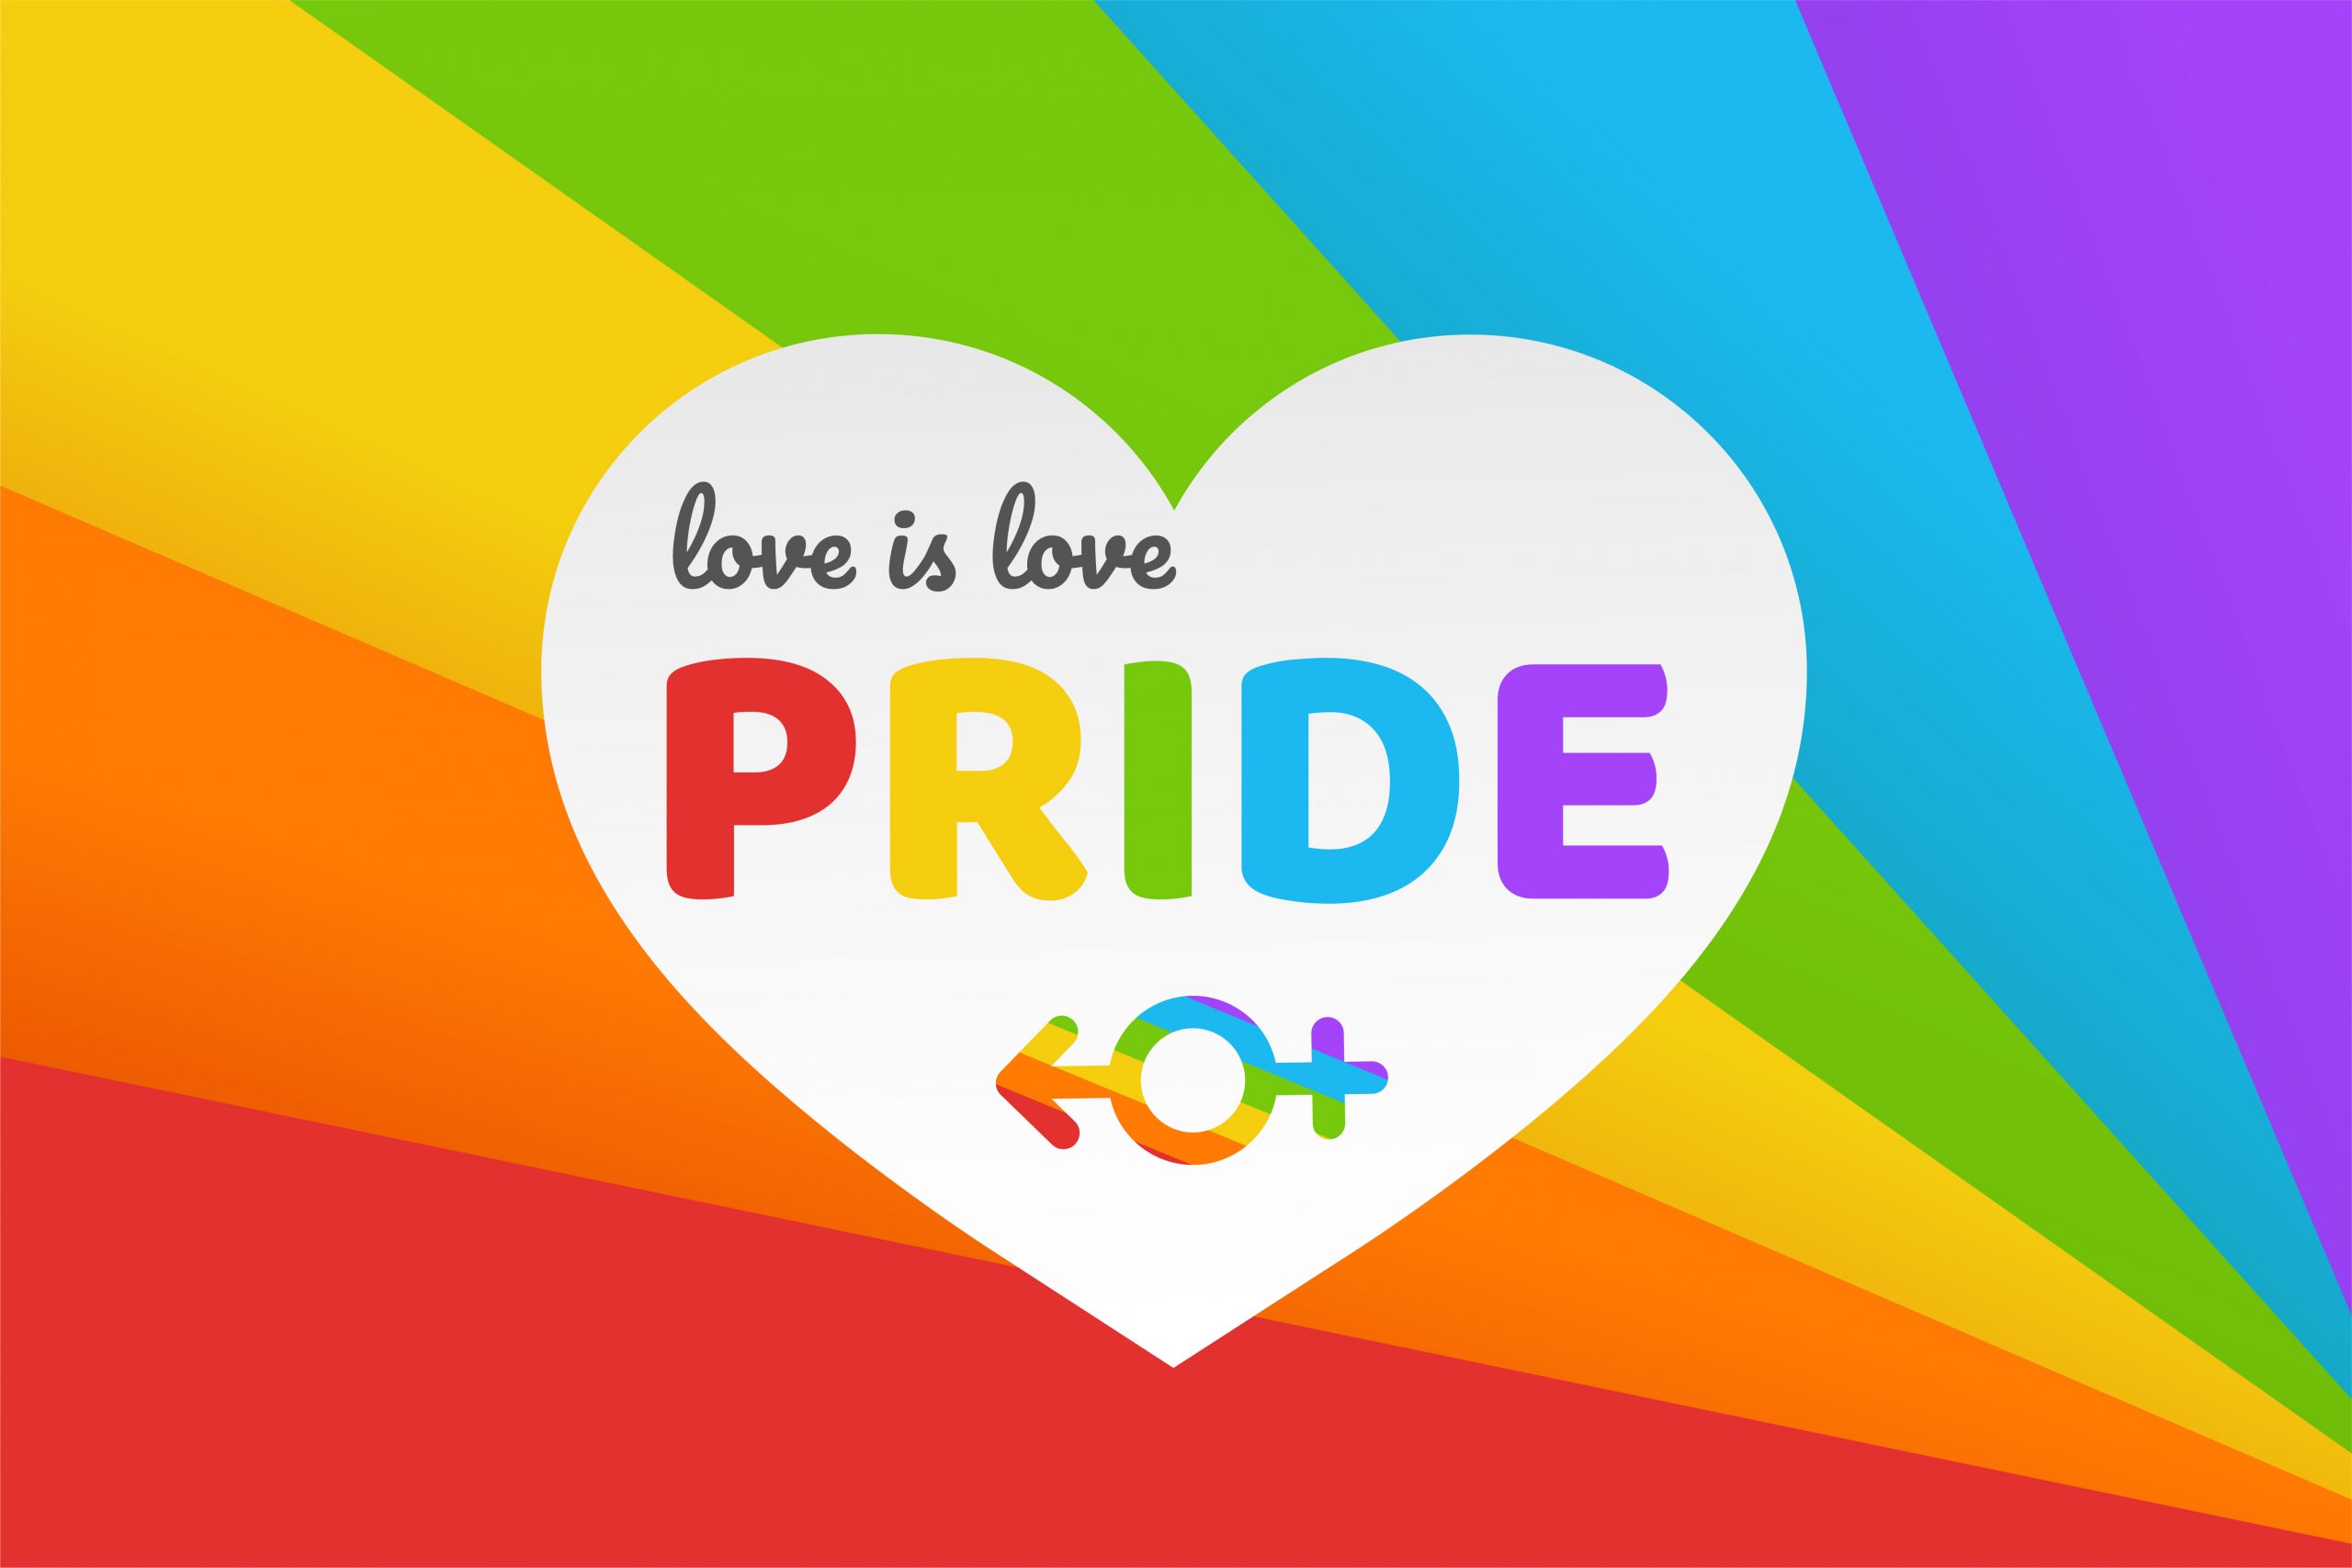 20 Best Gay Pride Wallpaper Designs to Show Your Support - iDevie